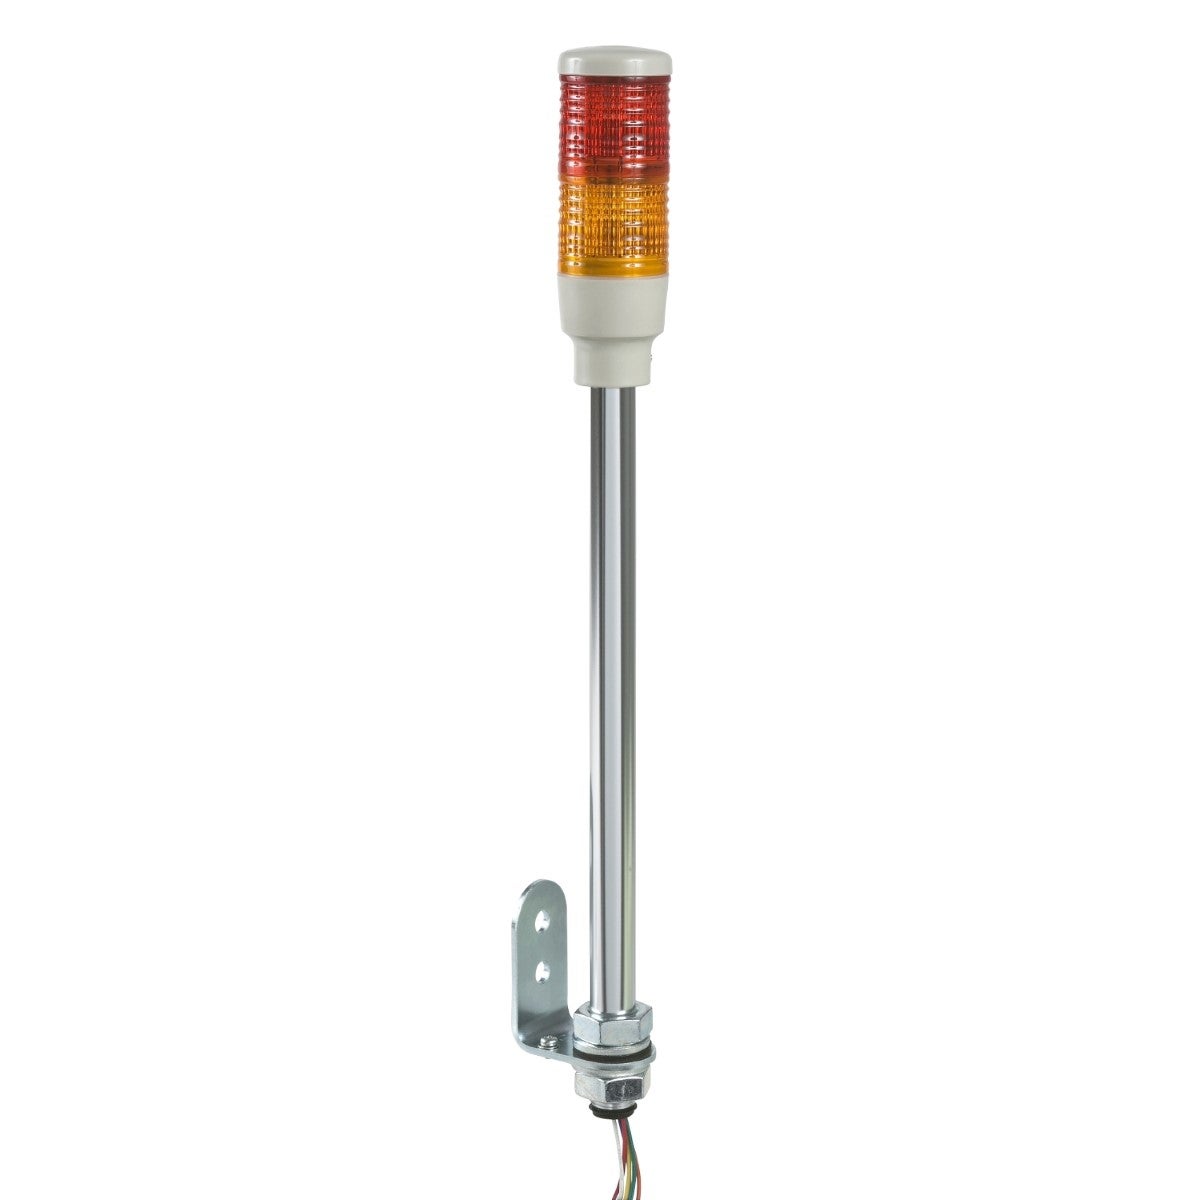 Monolithic precabled tower light, Harmony XVC, plastic, red orange, 40mm, tube mounting, steady, IP23, 24V AC DC